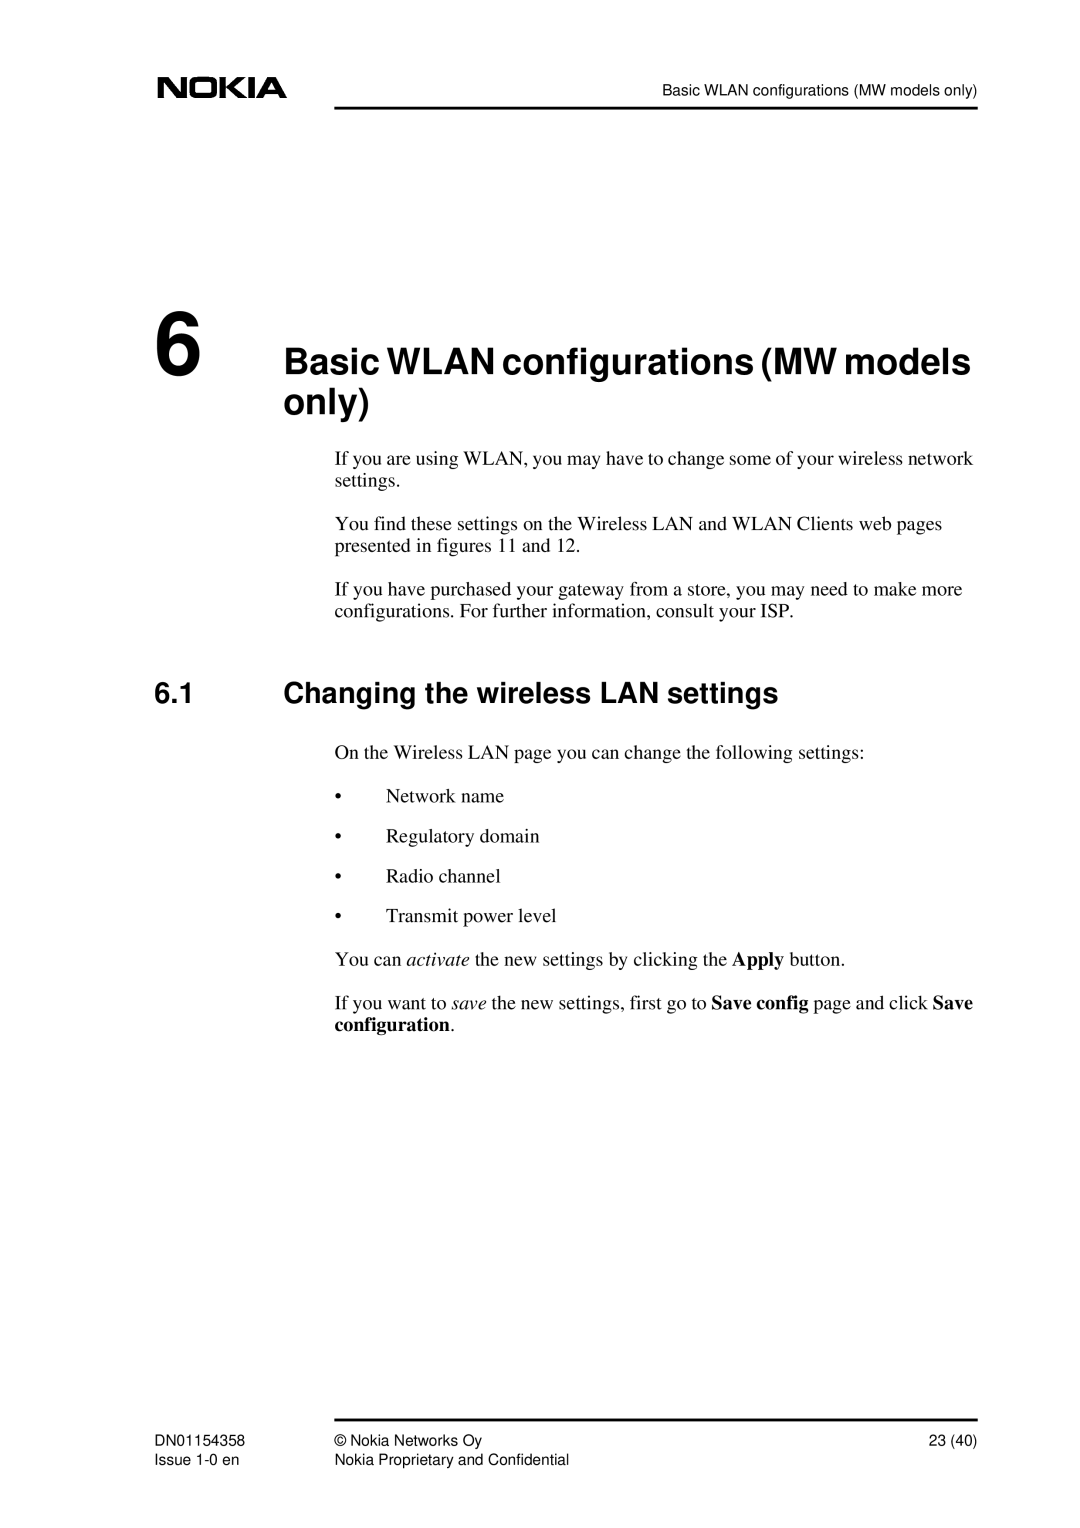 Nokia DSL Gateway High-Speed Internet Connection manual Basic WLAN configurations MW models only 